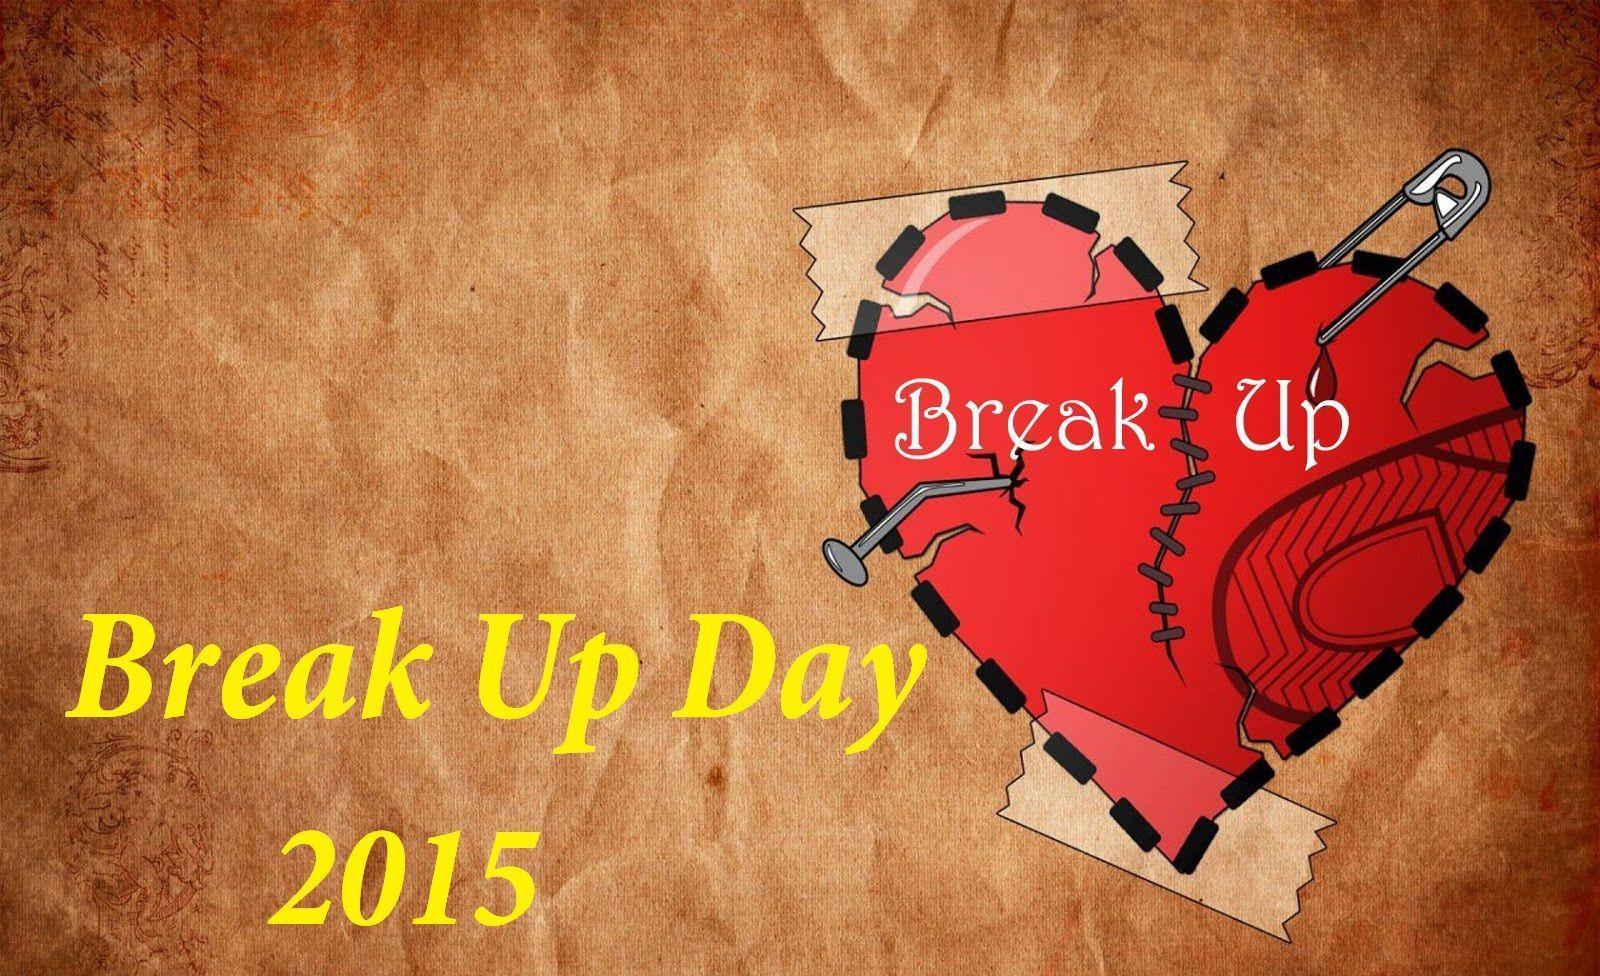 Break Up Day Status Quotes SMS Image Messages. Happy Breakup Day